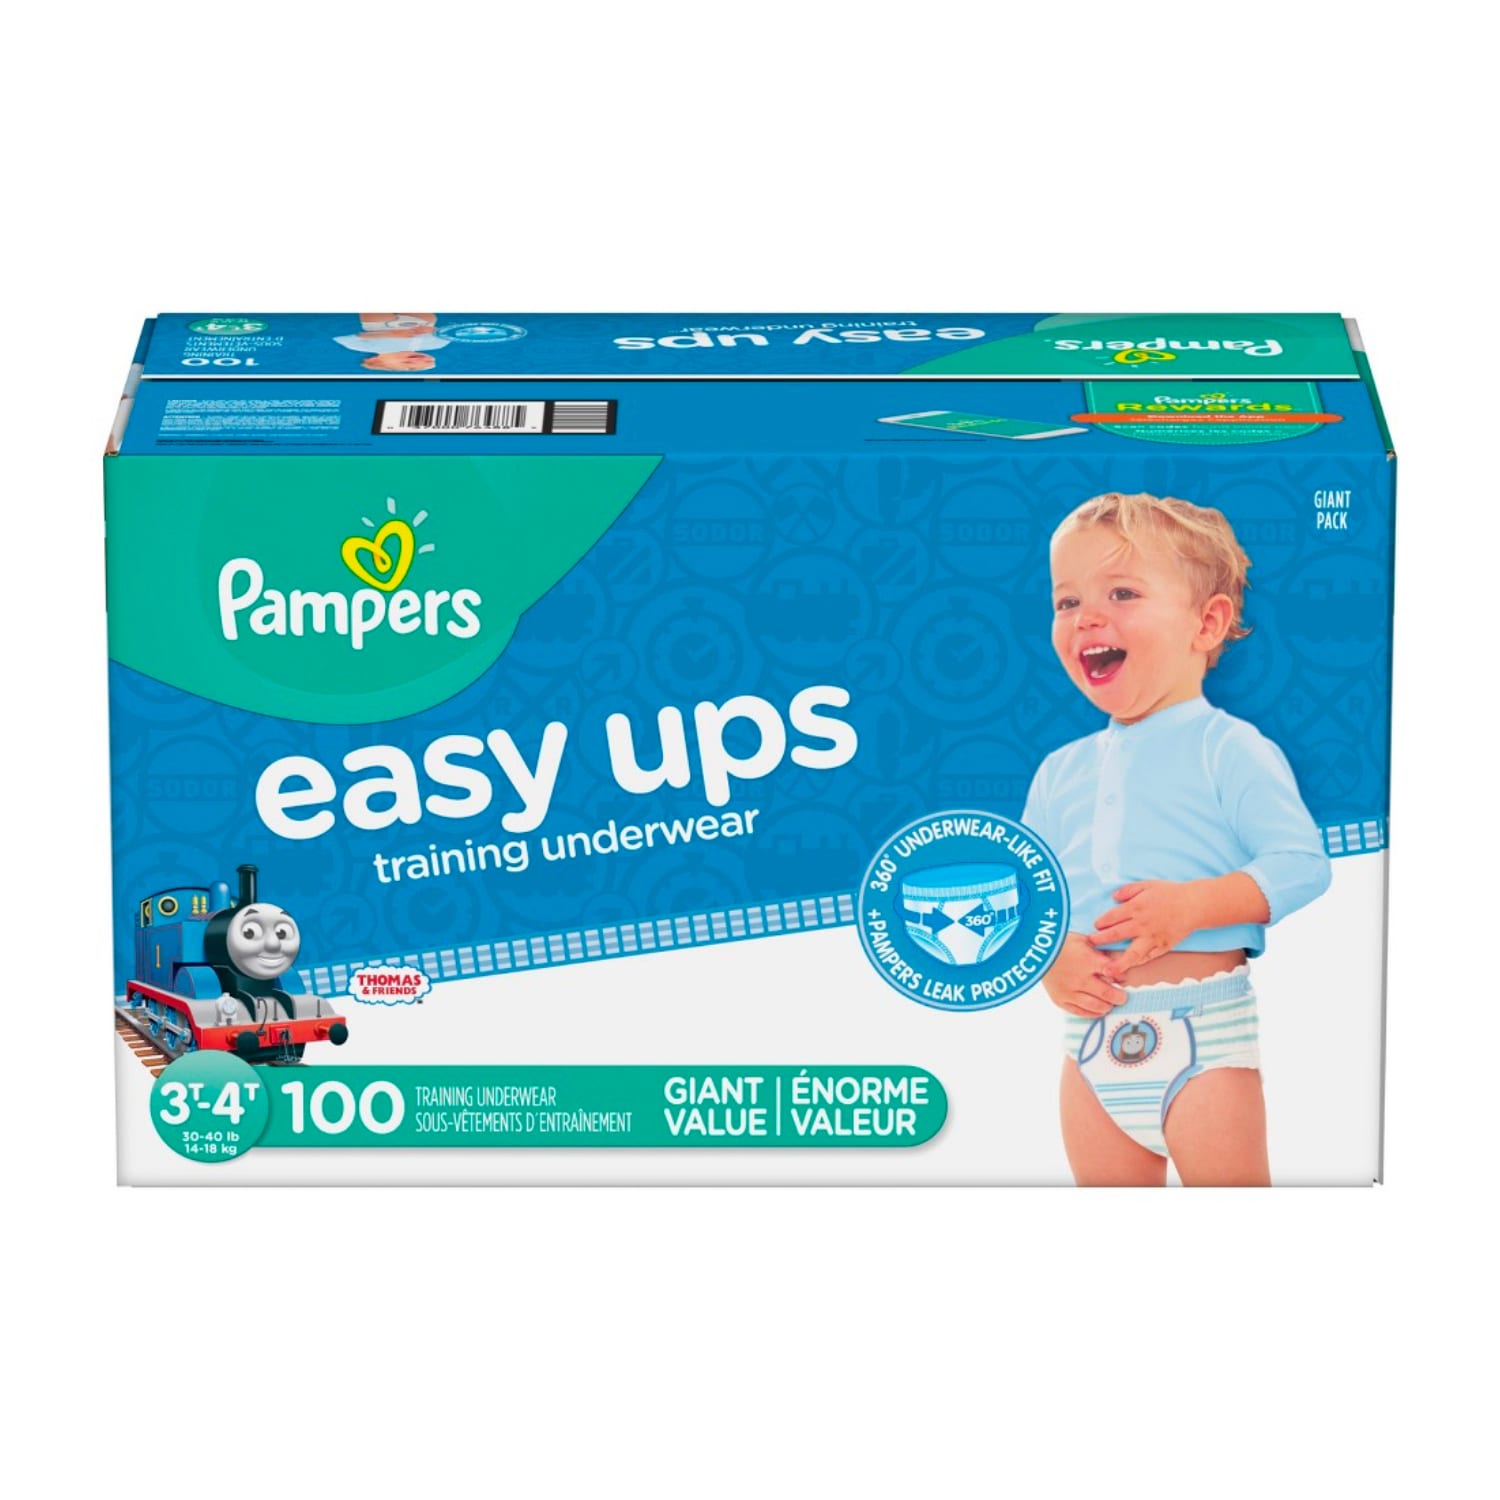 https://medaki.mo.cloudinary.net/static/products/pampers-easy-ups-training-pants-for-boys-giant-pack-size-3t-4t-104-count.webp